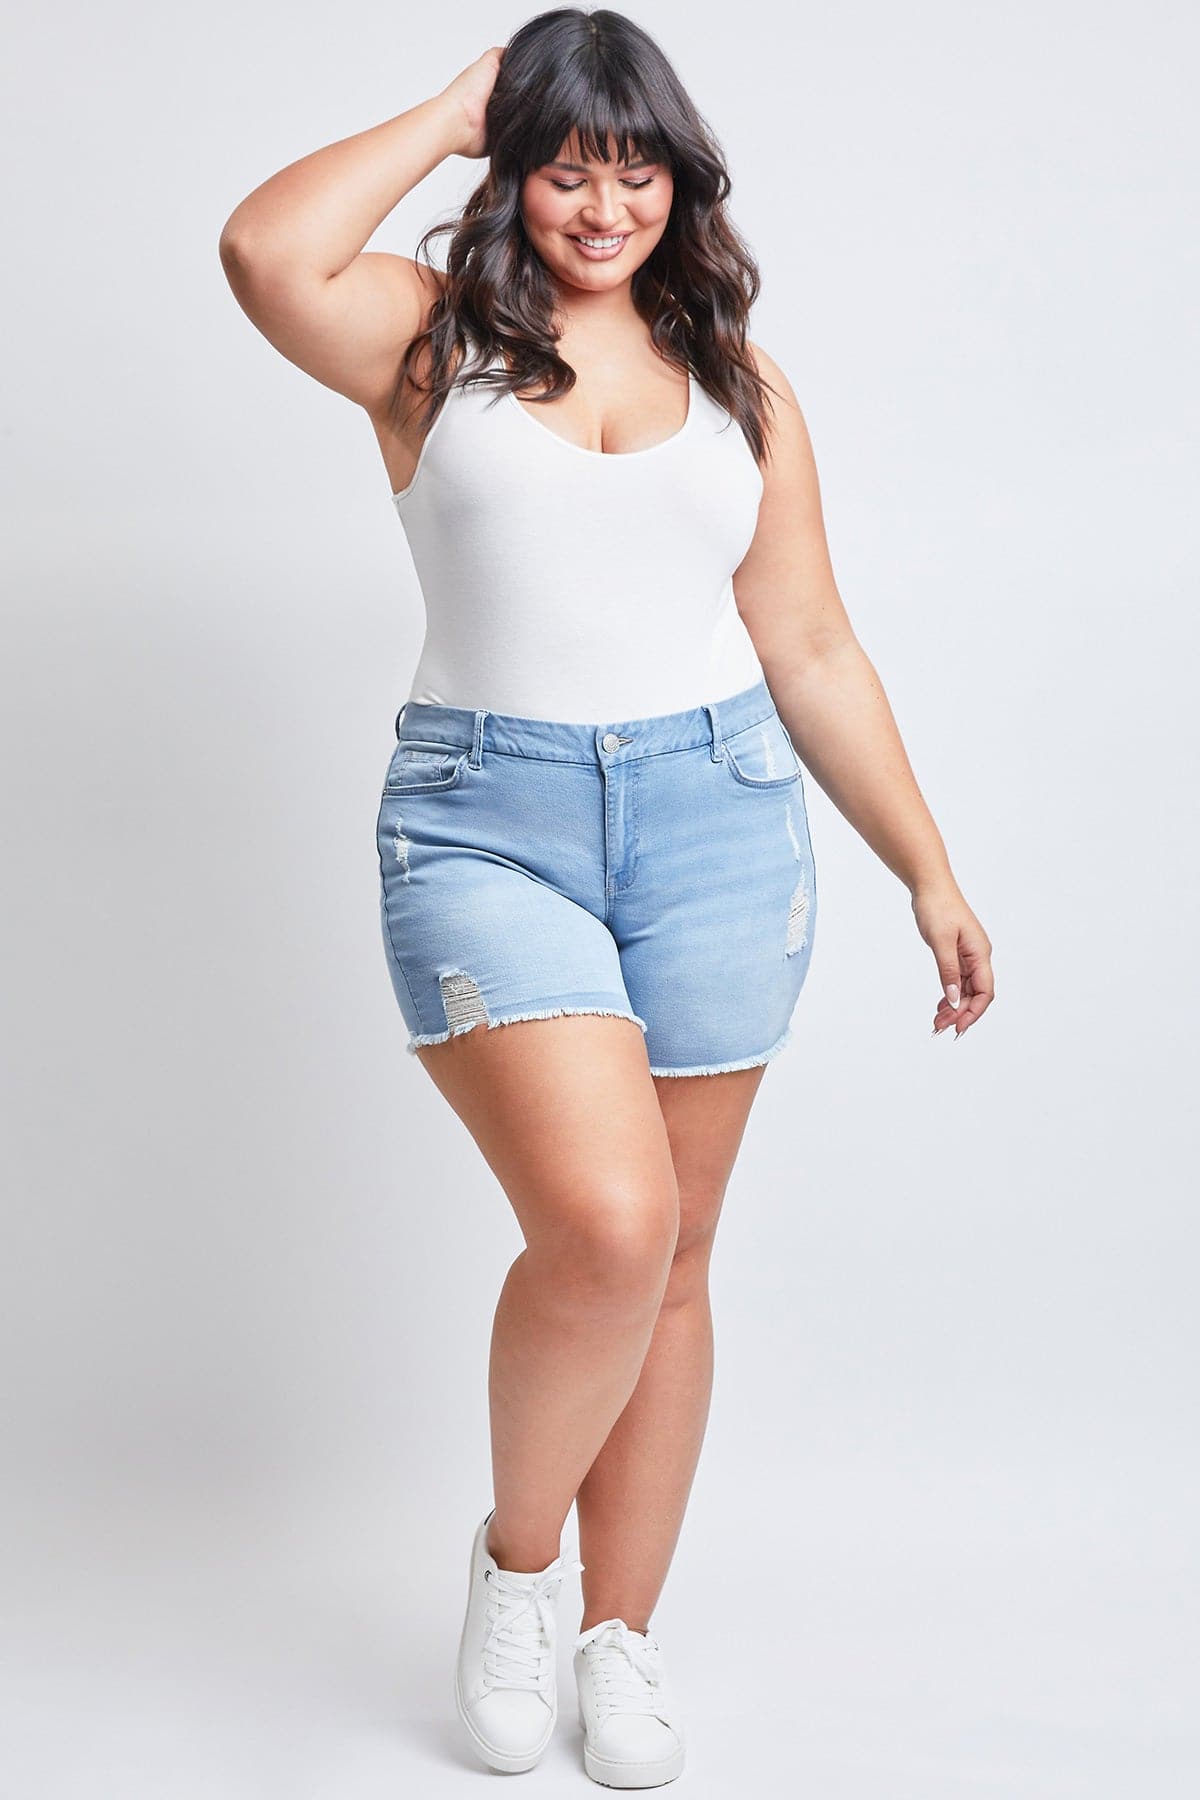 Plus Size Women's Curvy Fit  Jeans Shorts With Fray Hem